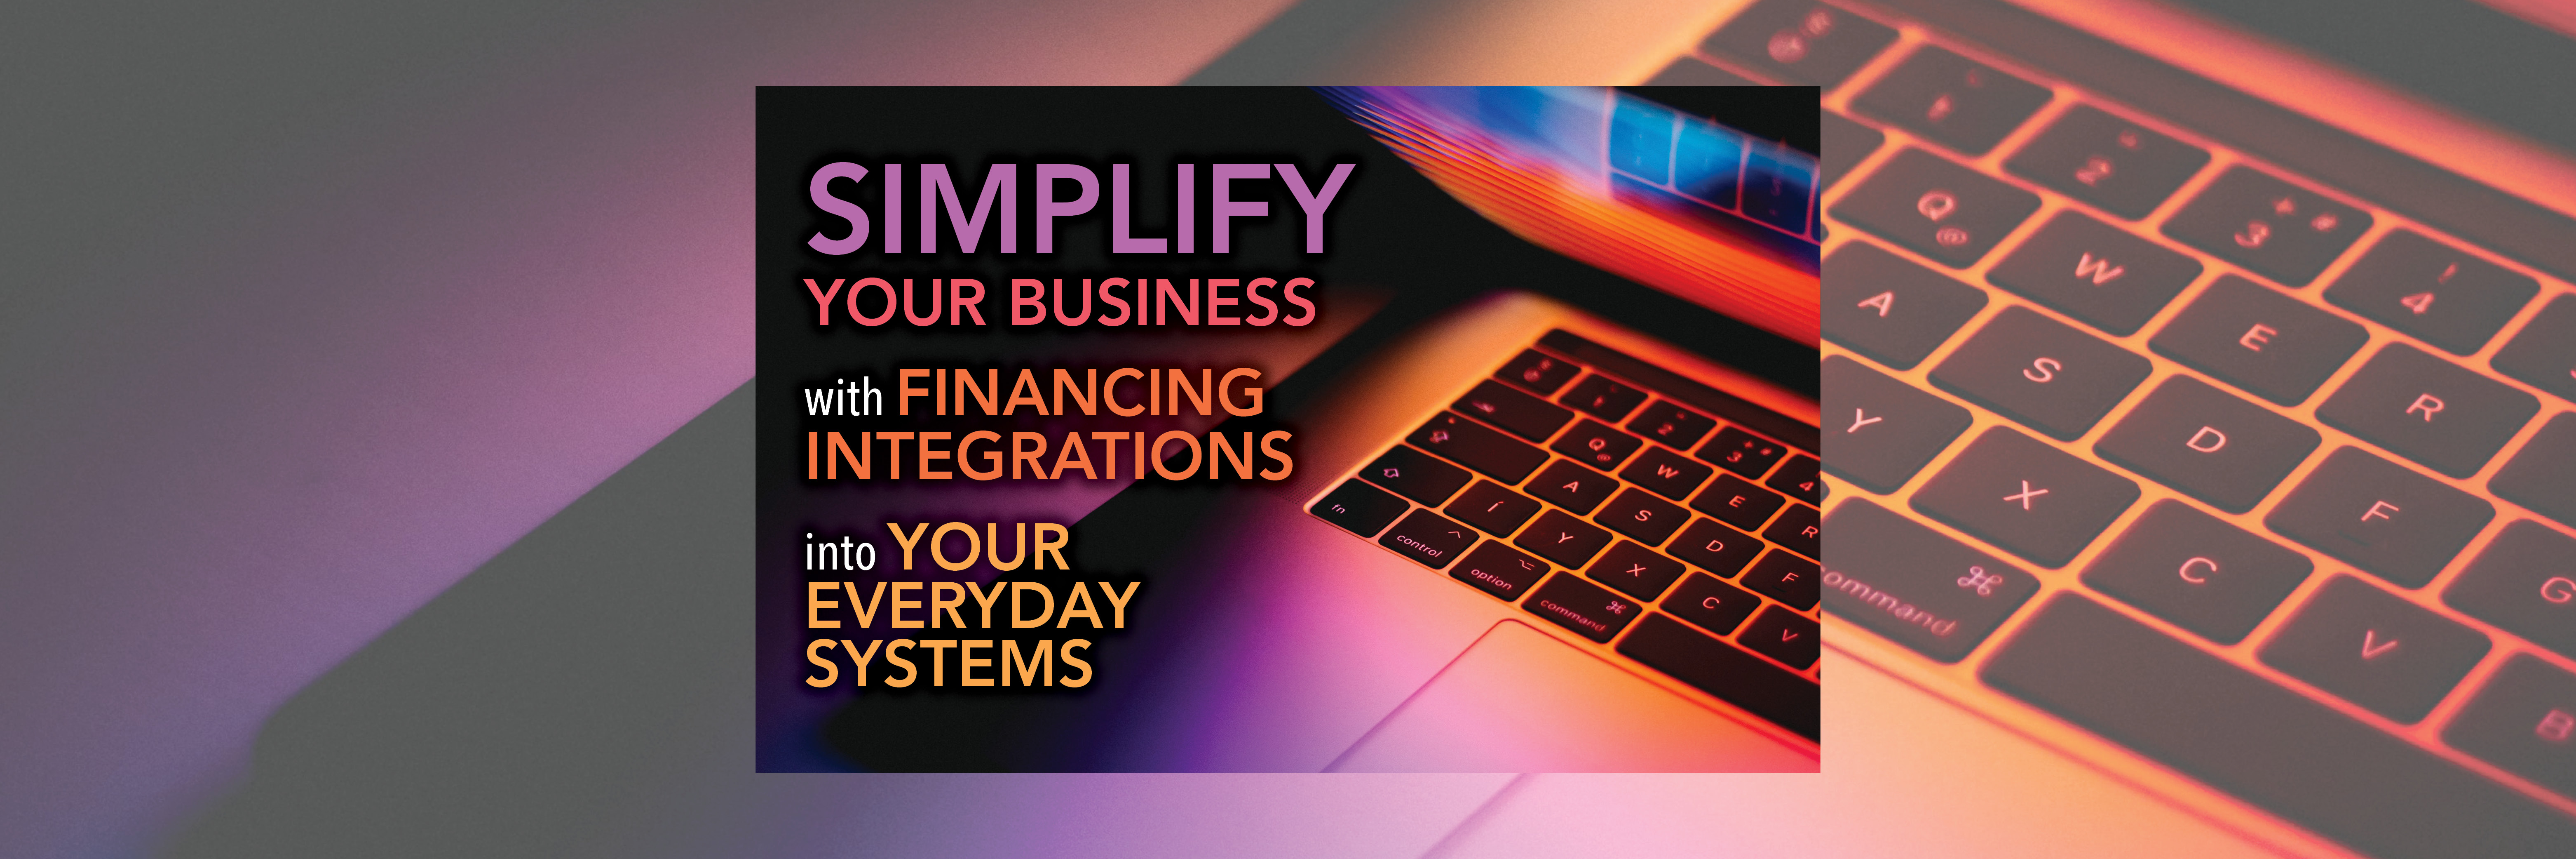 Simplify Your Business with Financing Integrations into Your Everyday Systems